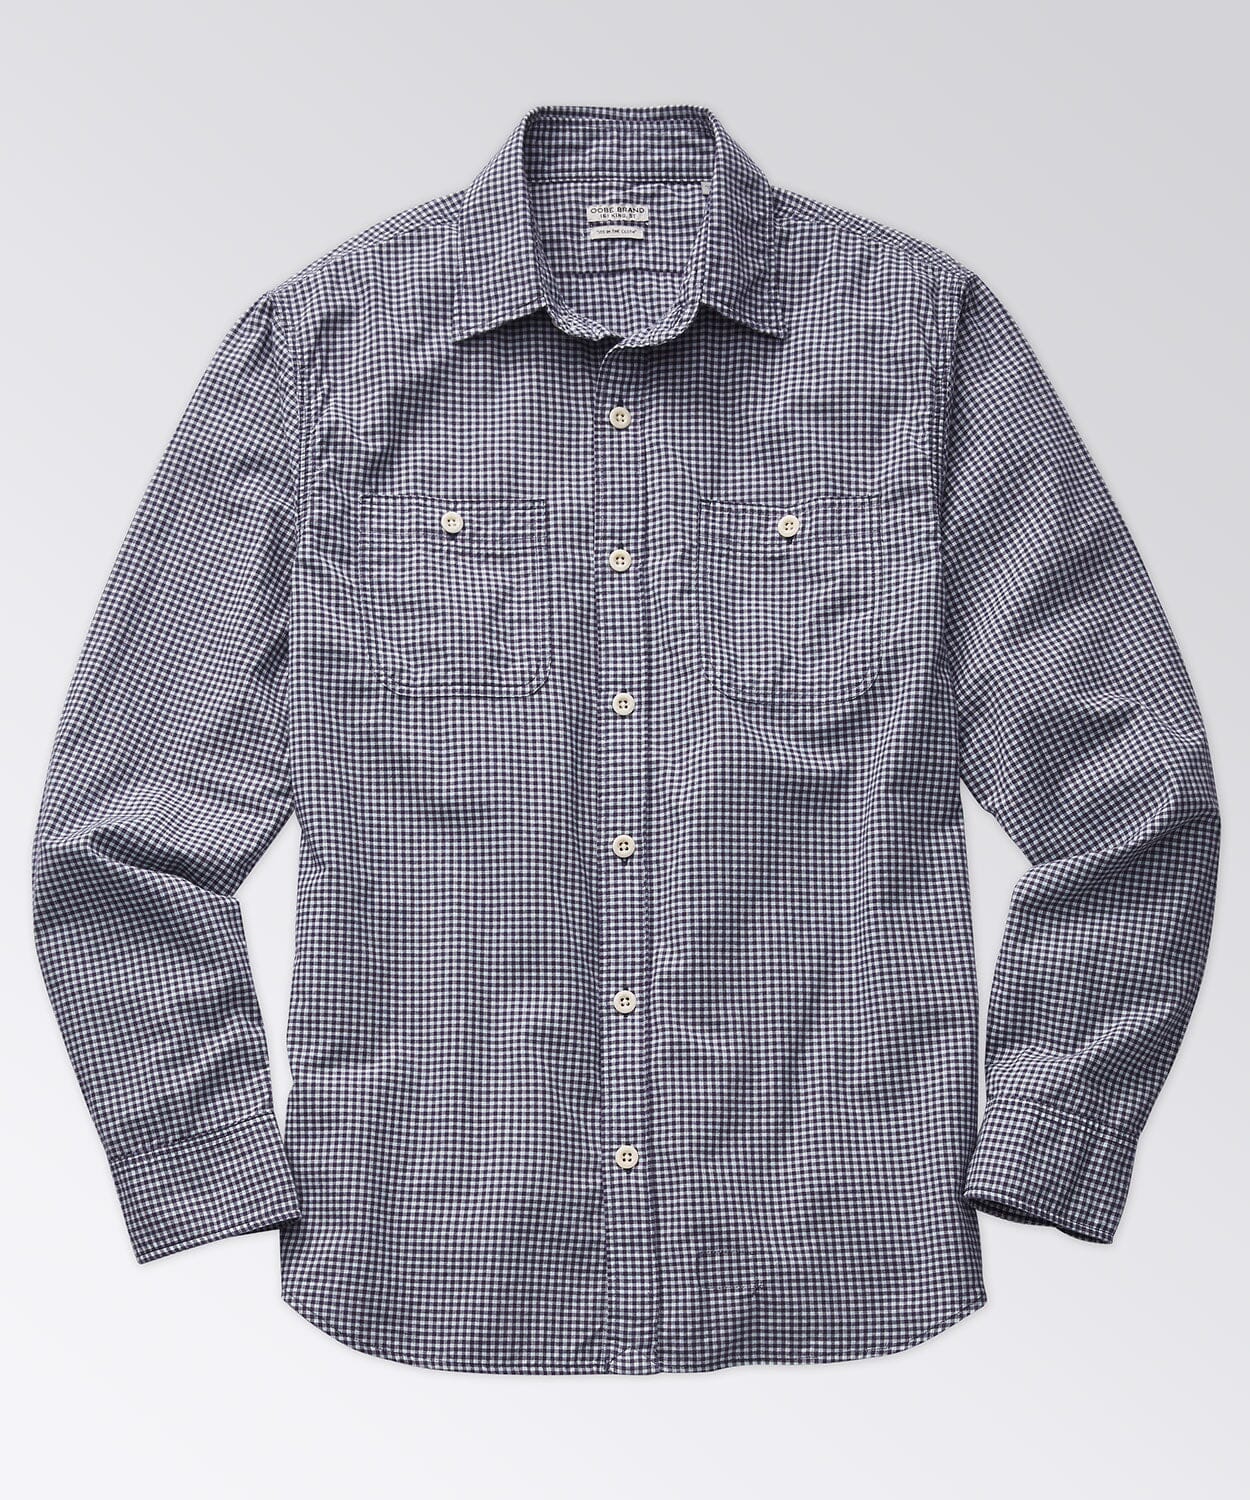 Marlan Check Workshirt Button Downs OOBE BRAND Blue/White L 